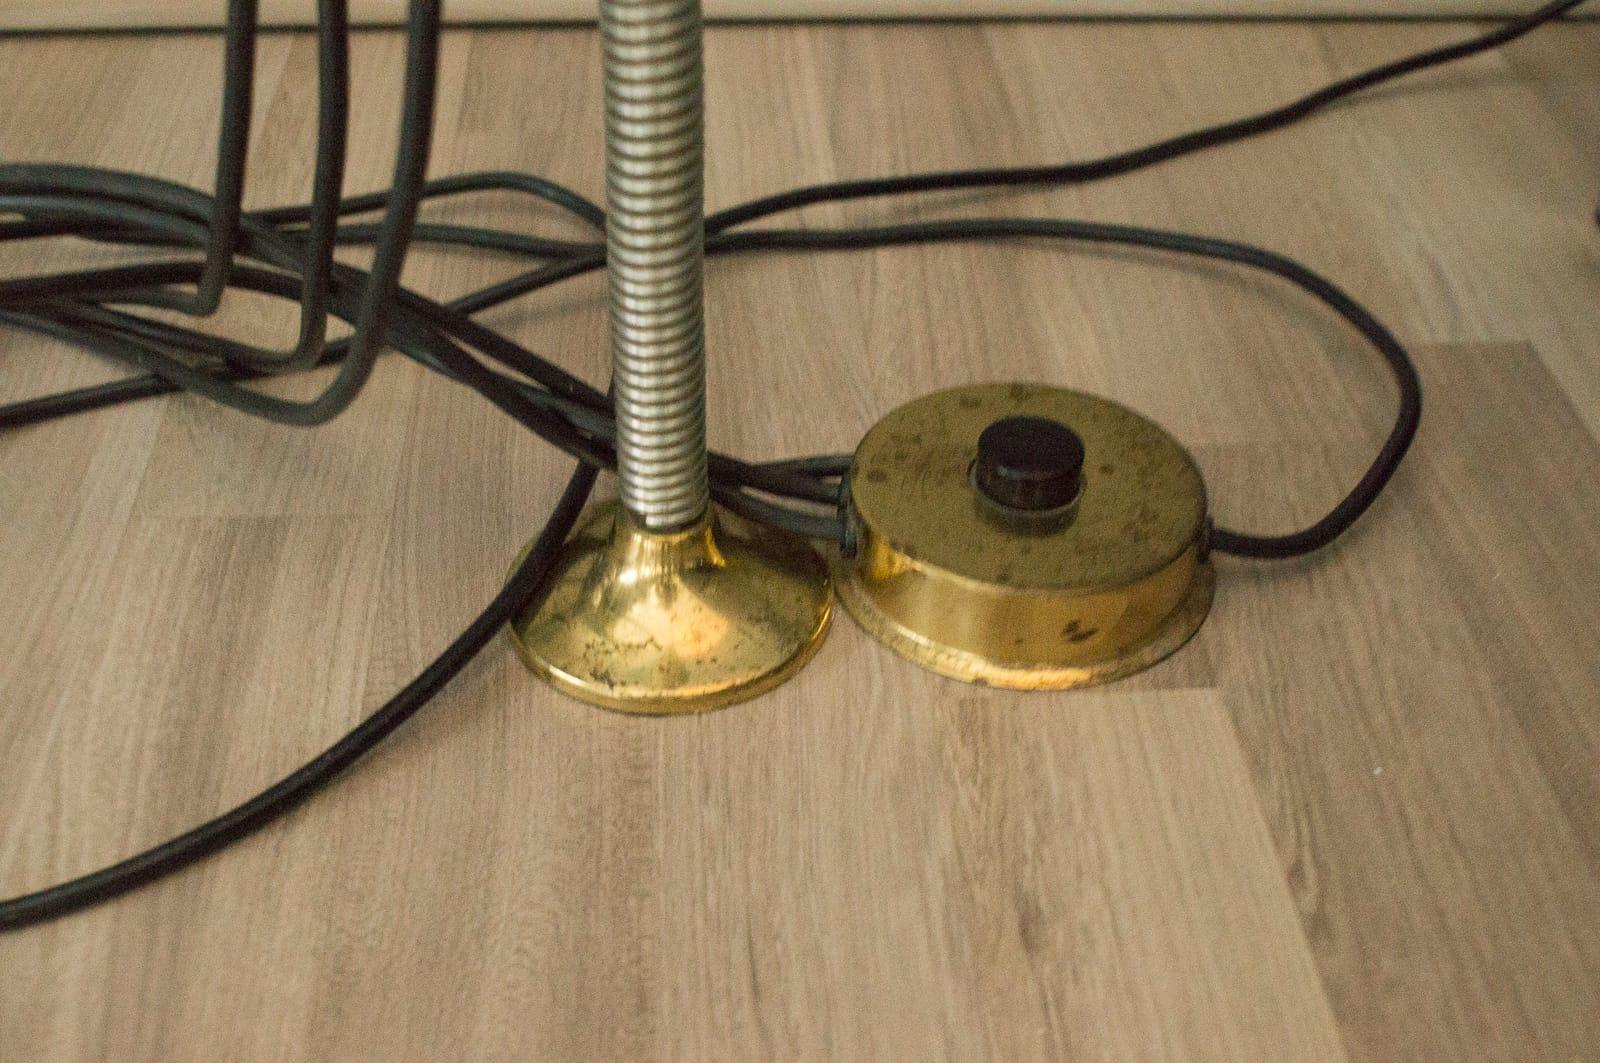 Extremly Rare Brass Tension Lamp from Florian Schulz, Model S 100 13